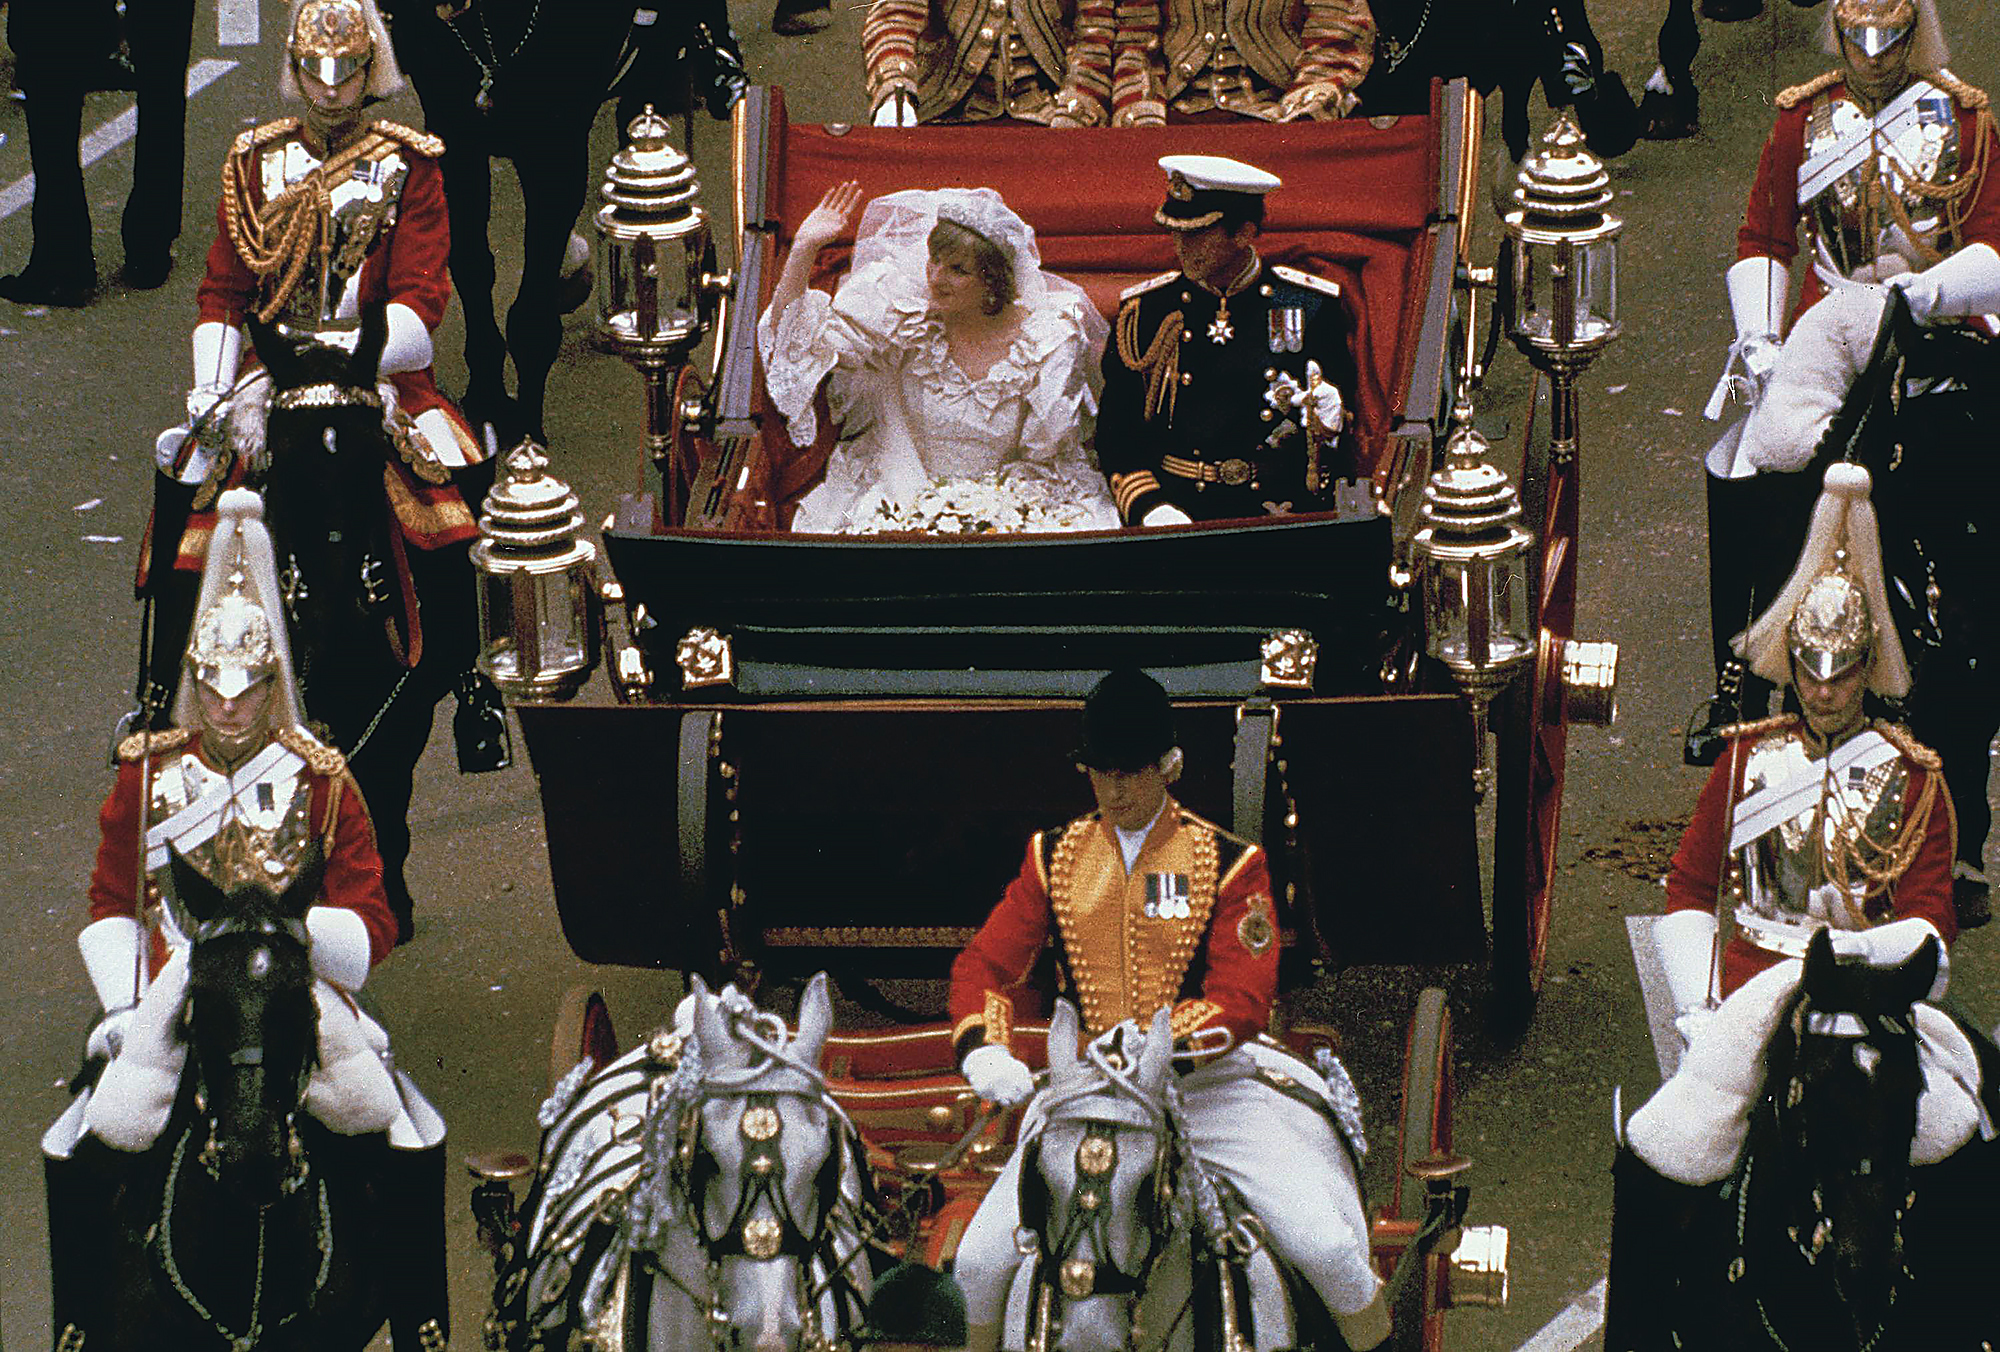 Princess Diana, waving to the crowds, and Prince Charles in an open, horse-drawn carriage on their wedding day